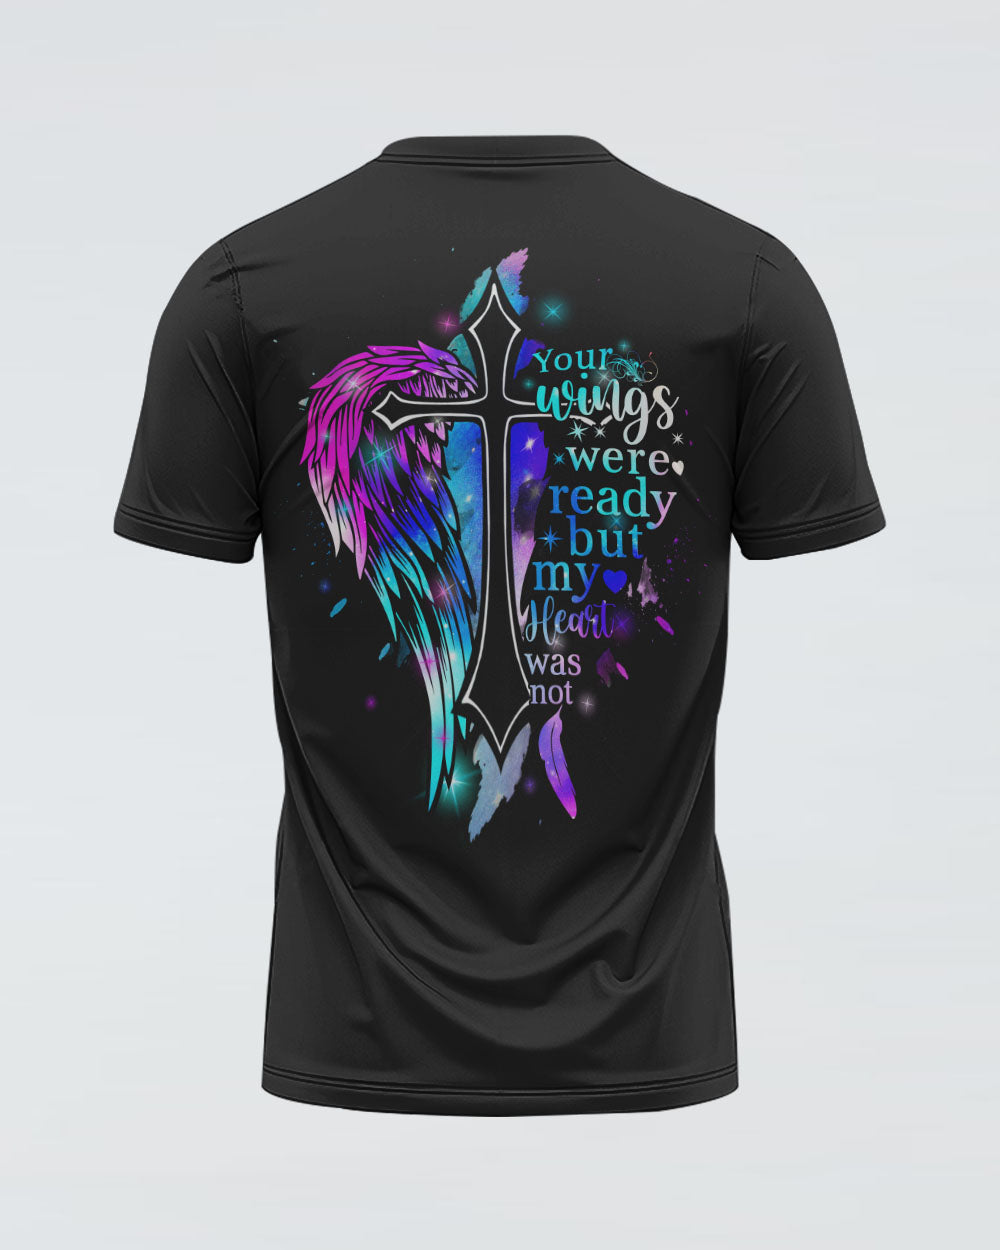 Your Wings Were Ready Women's Christian Tshirt